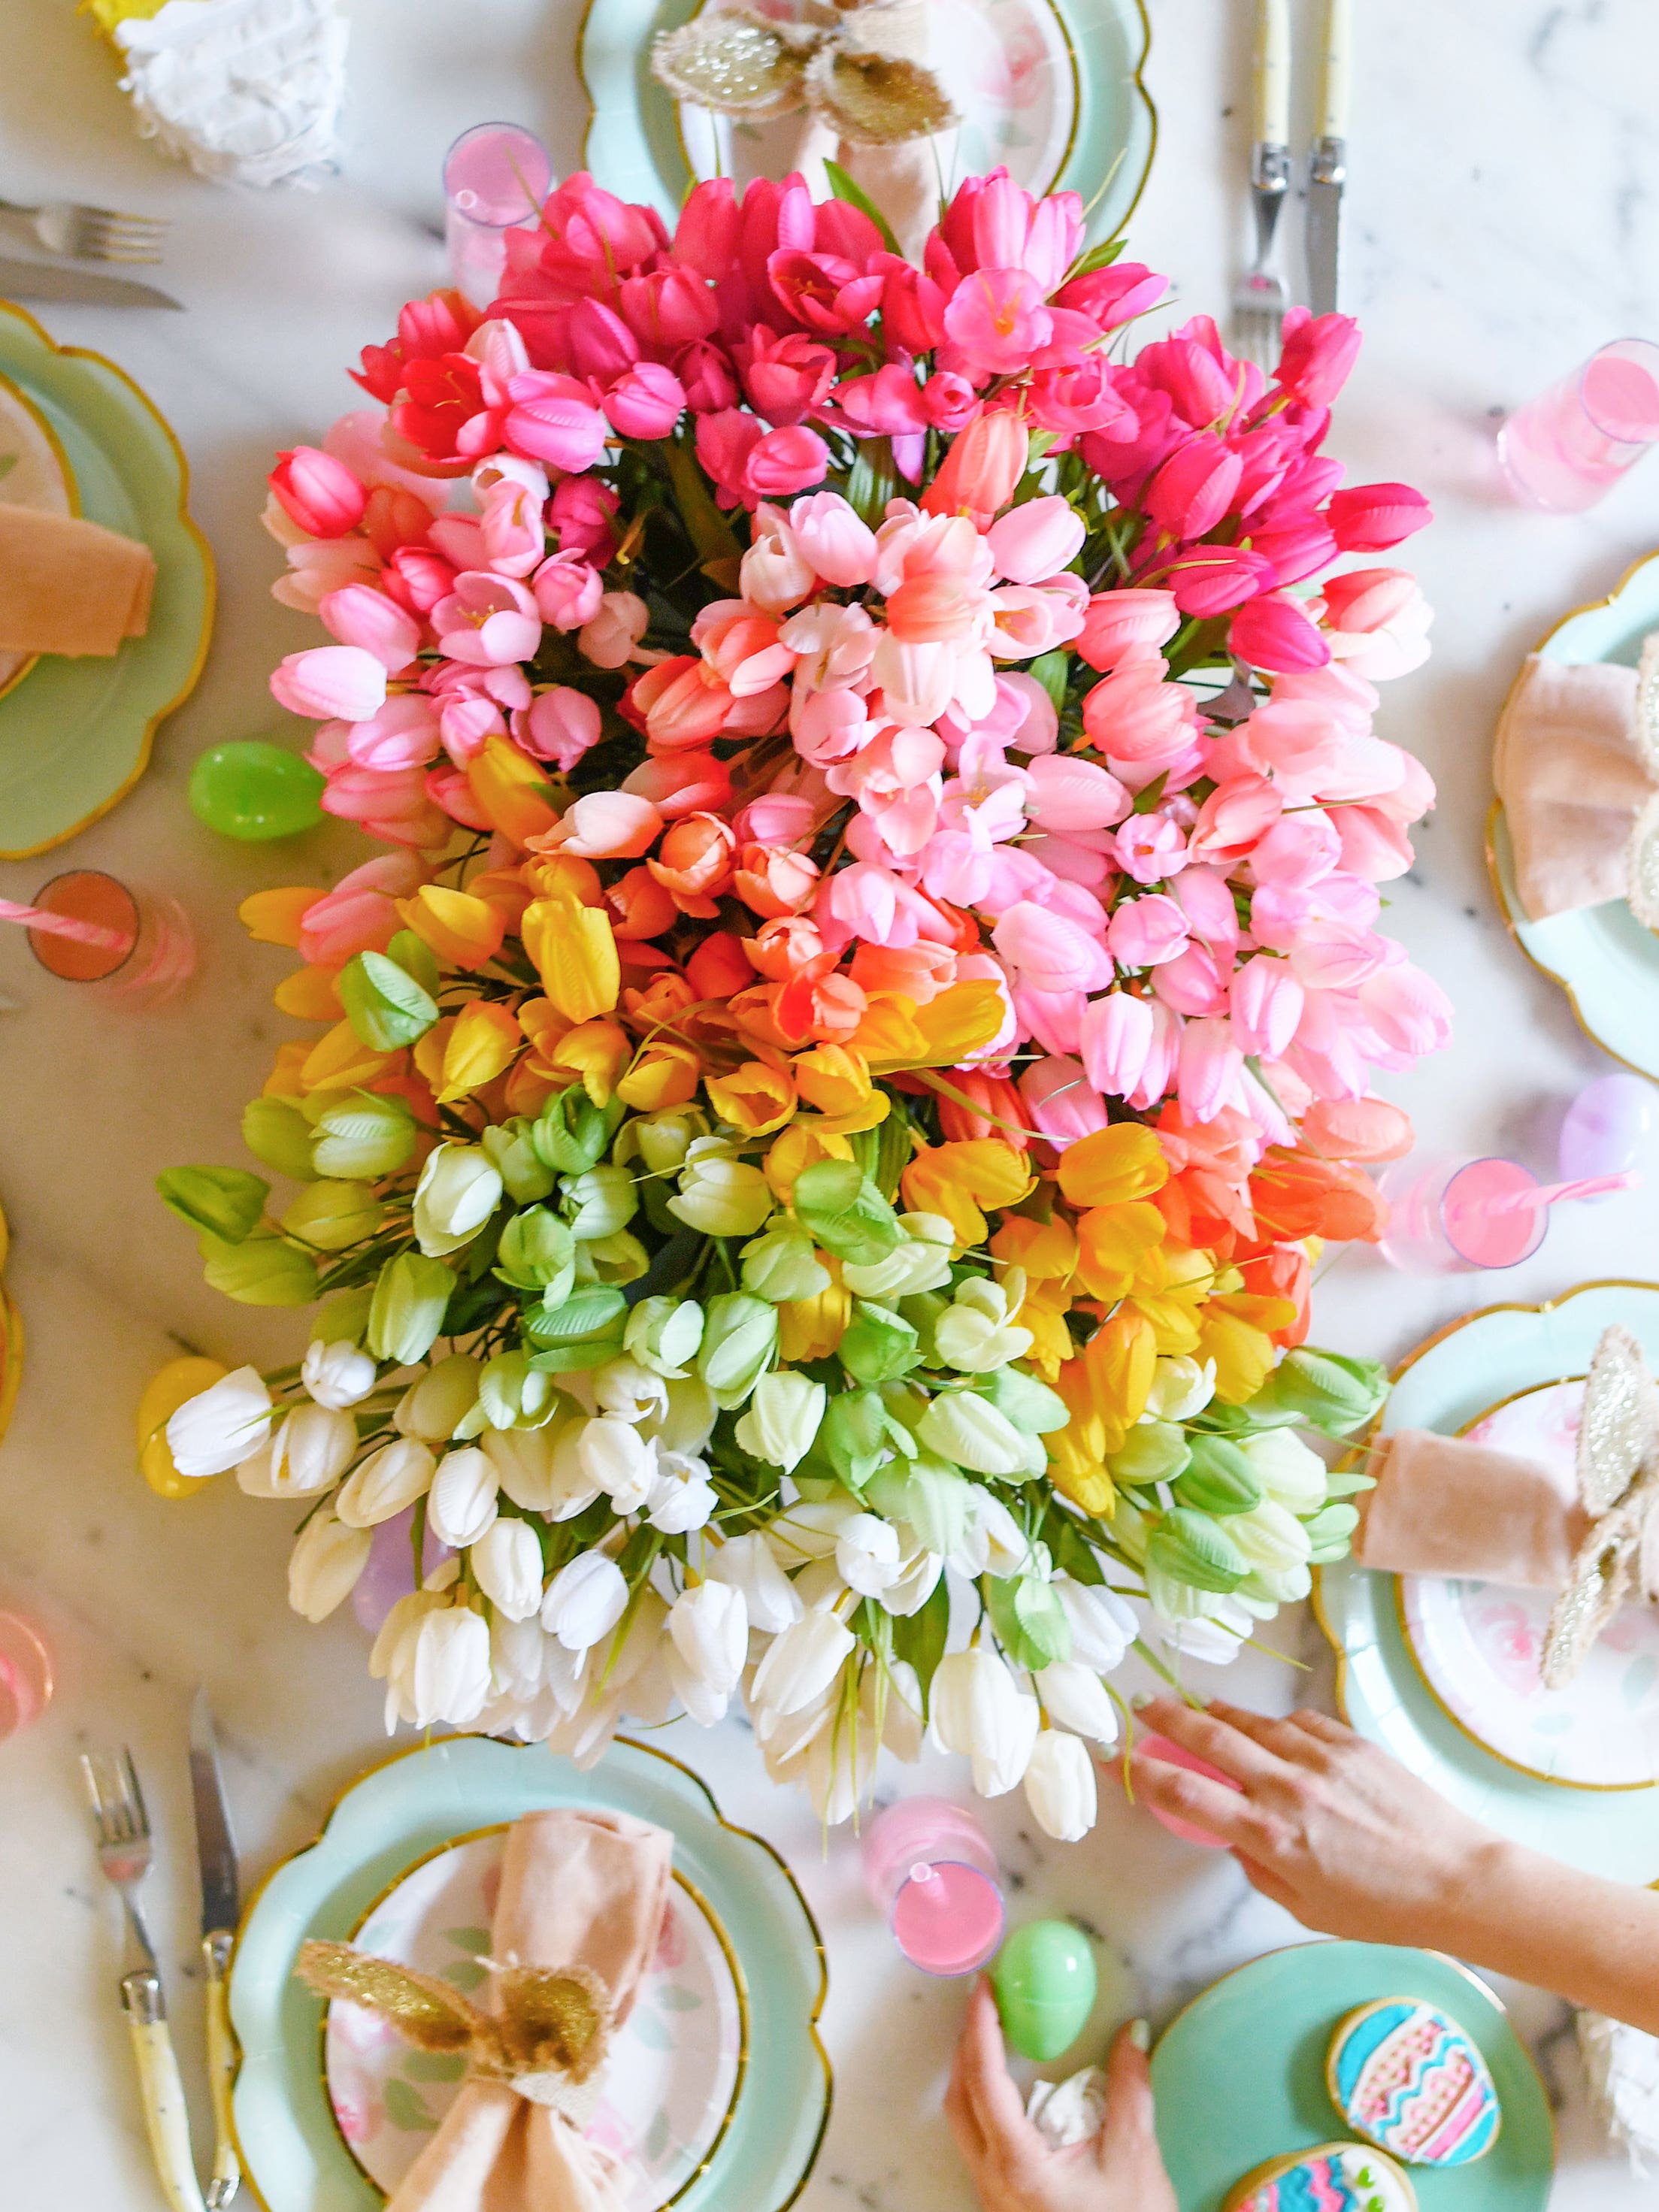 10 Non-Cliche Easter Decorating Ideas That’ll Carry You Through Spring